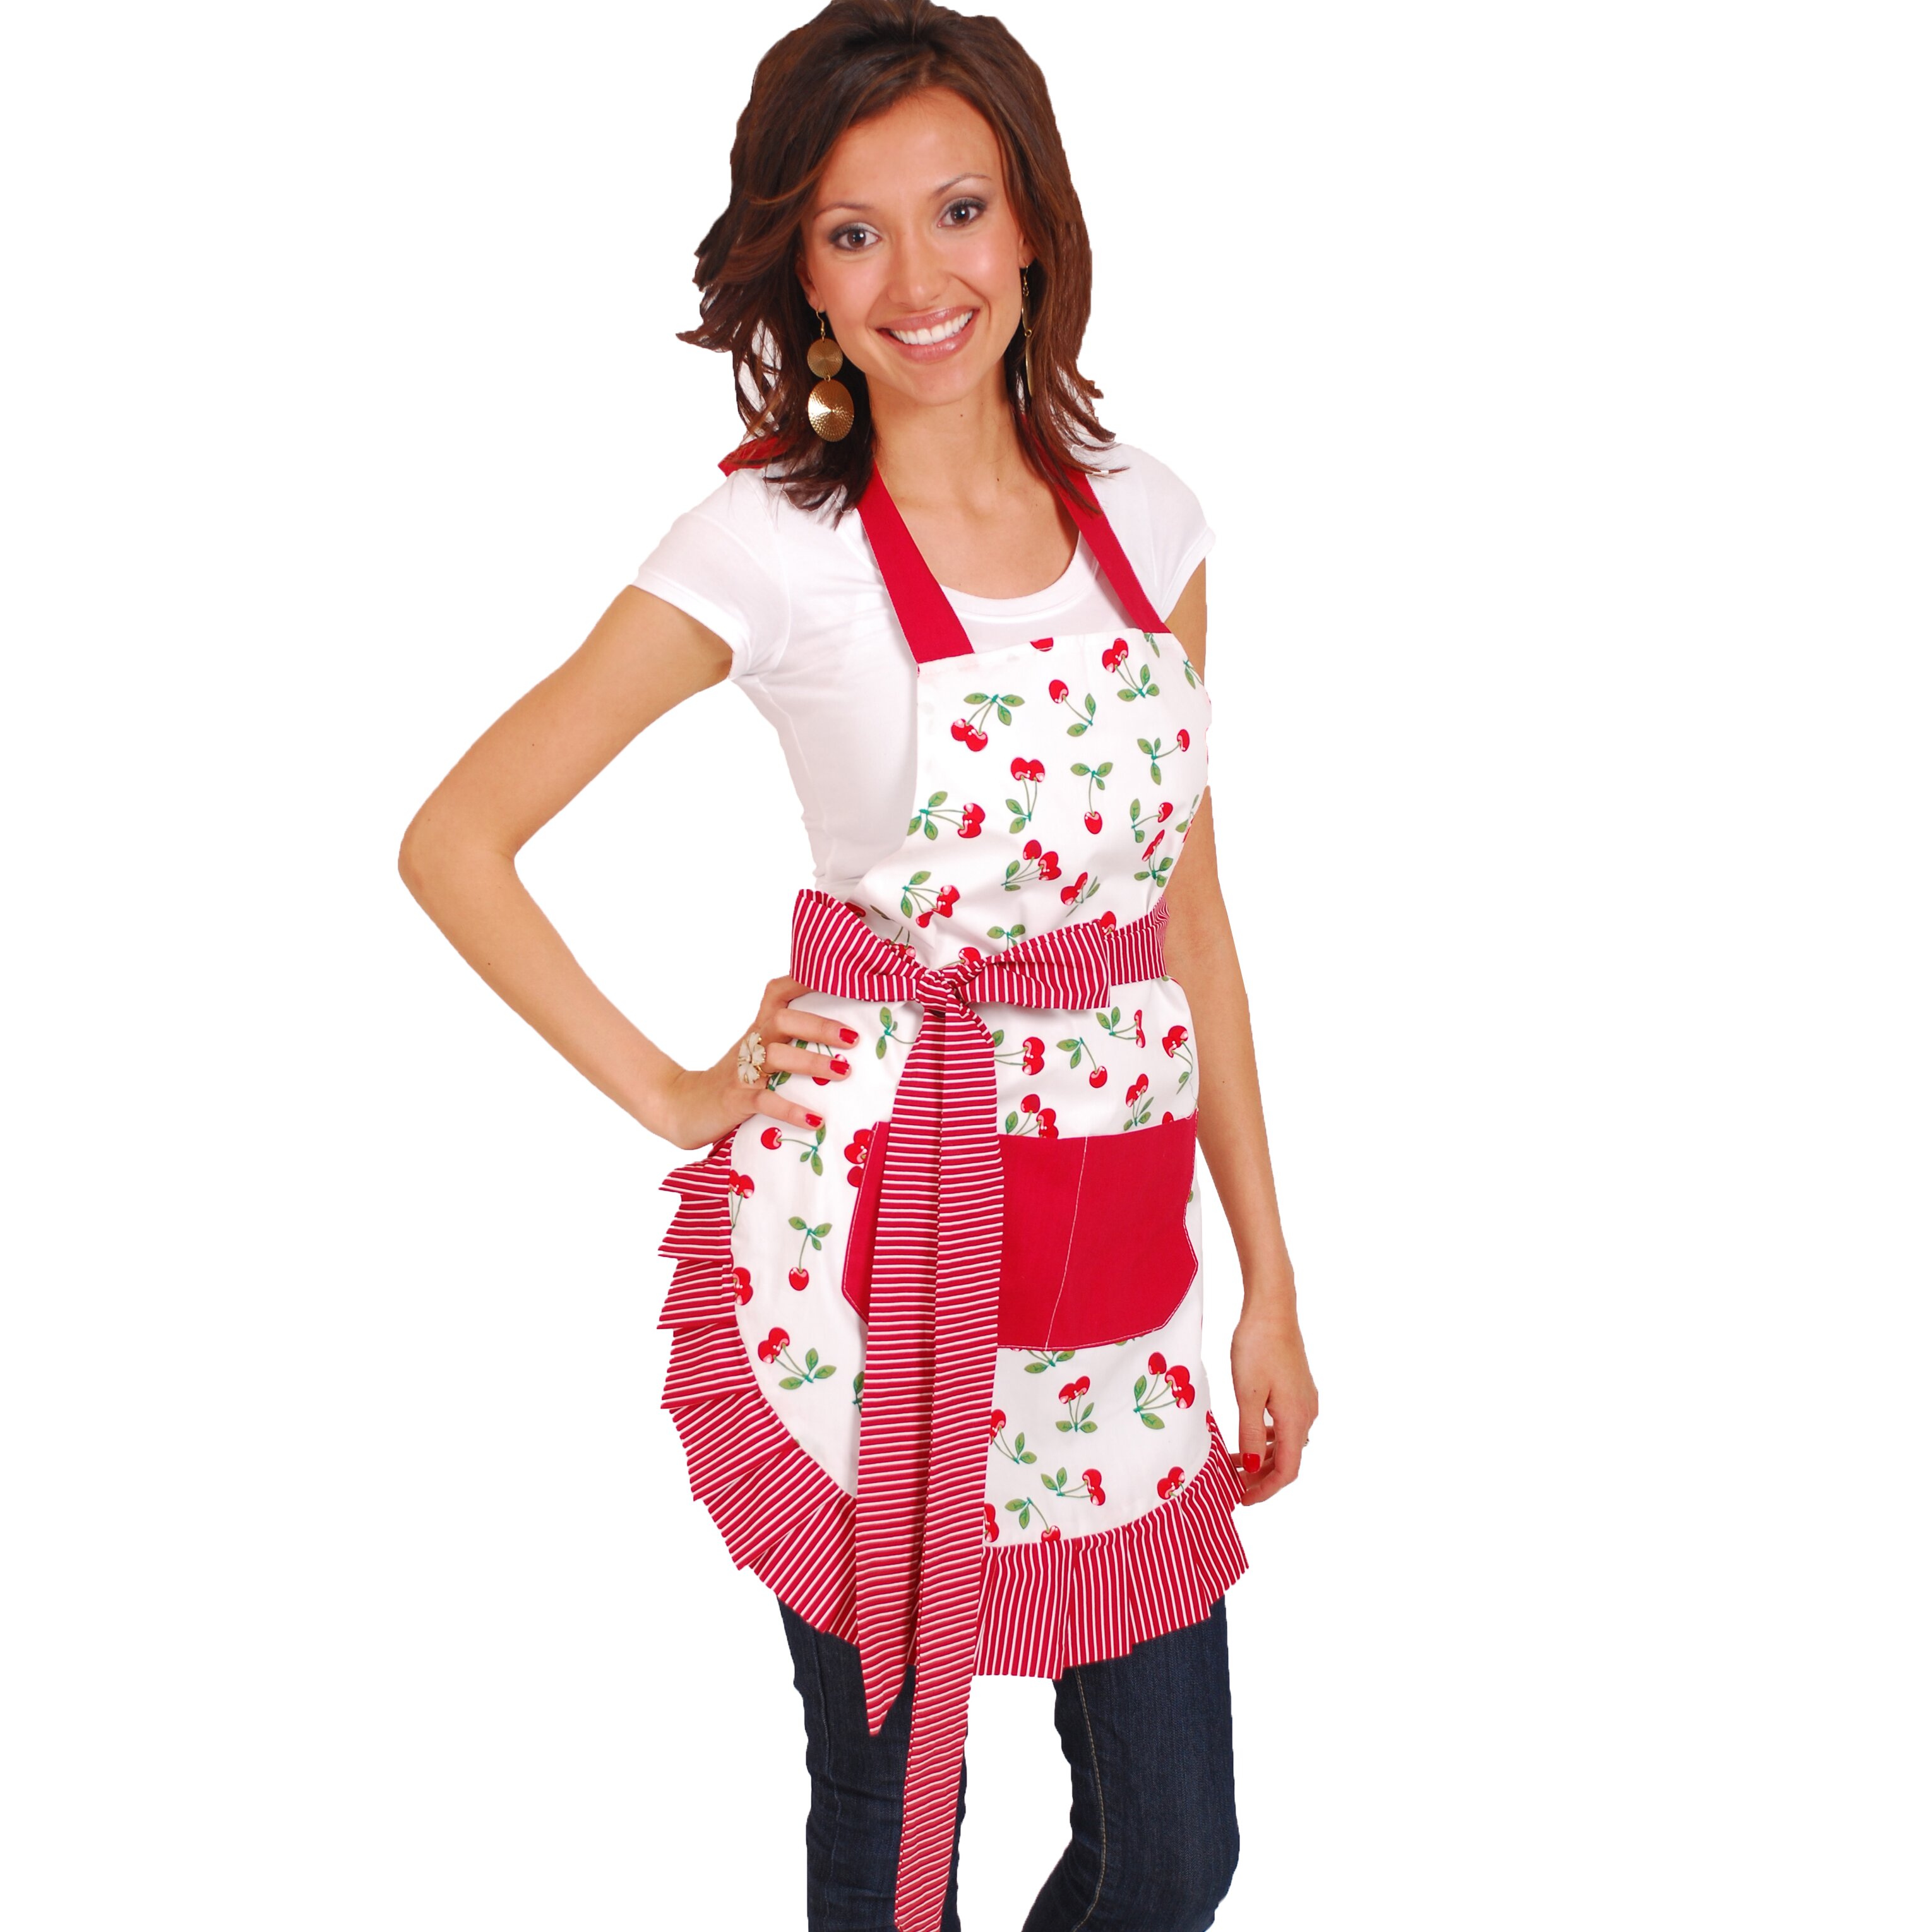 Flirty Aprons Women S Apron In Very Cherry And Reviews Wayfair